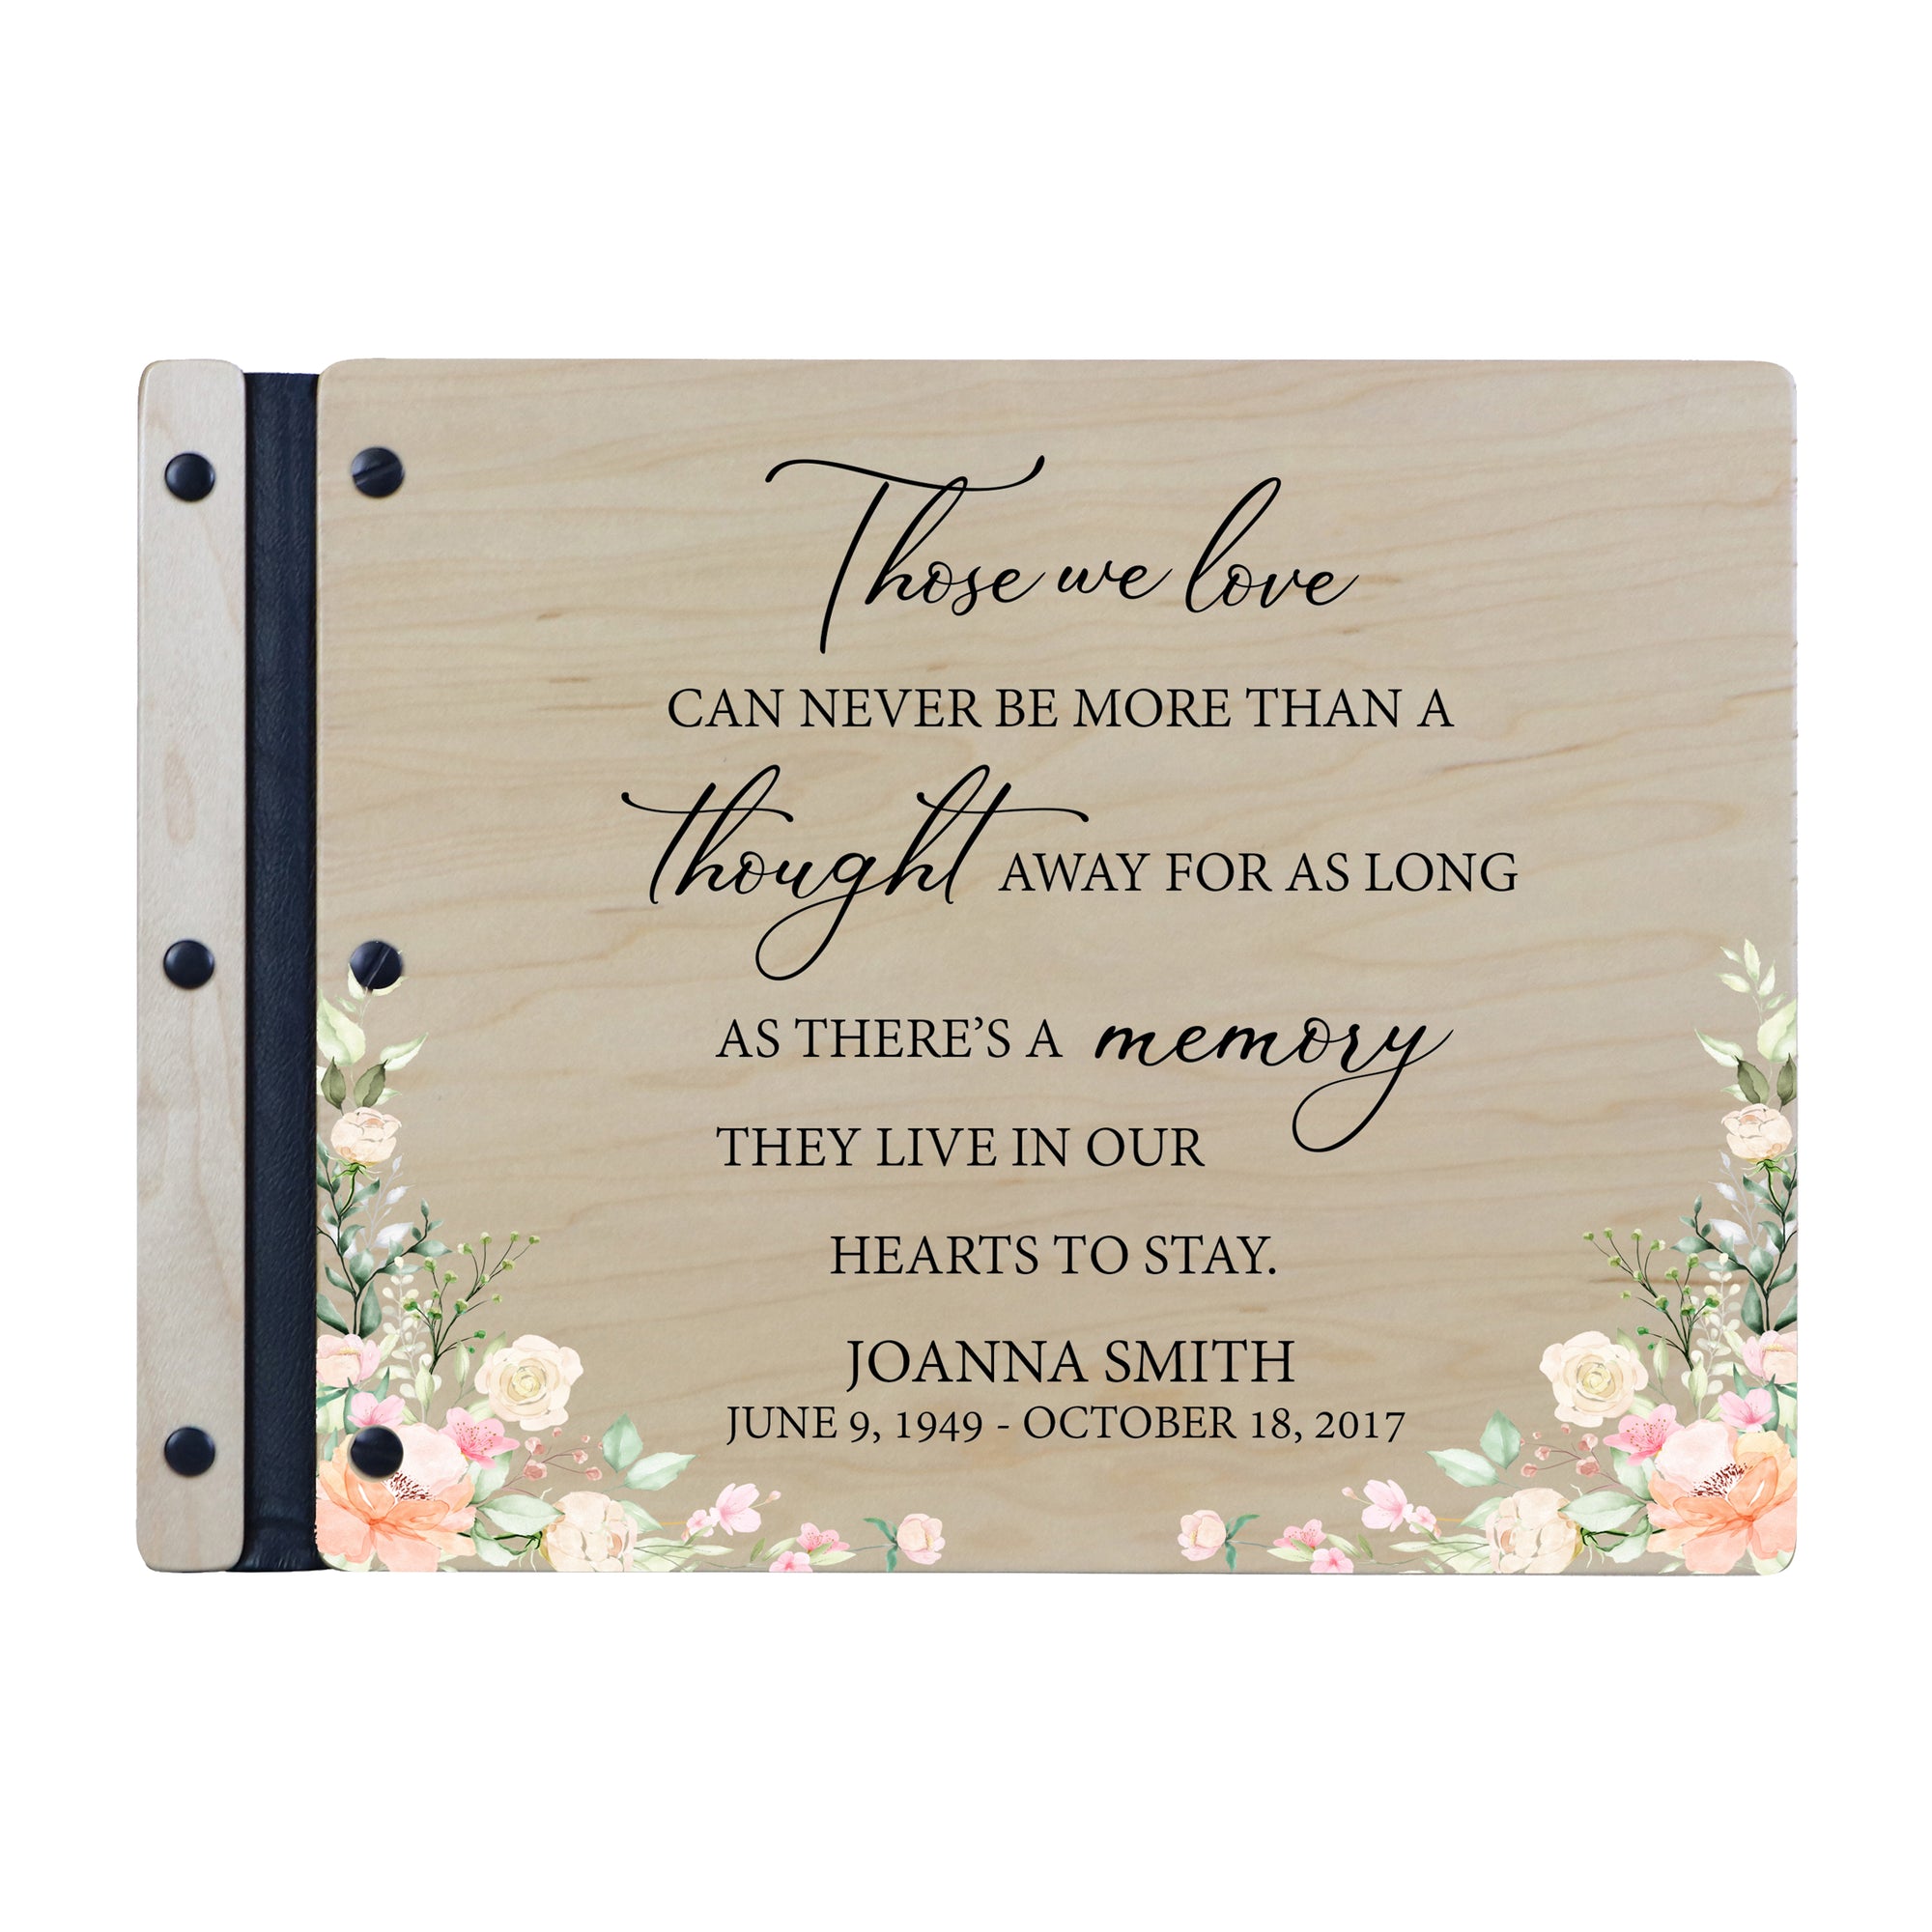 Lifesong Milestones | Funeral Guest Book Custom Engraved Wooden Memorial Guestbook. Celebration of Life Guest Book Remembrance In Loving Memory Keepsake, memorial guestbook, a life remembered a memorial guestbook, personalized memorial guestbook, custom guestbook, funeral guestbook, personalized guestbook, guestbook for funeral.